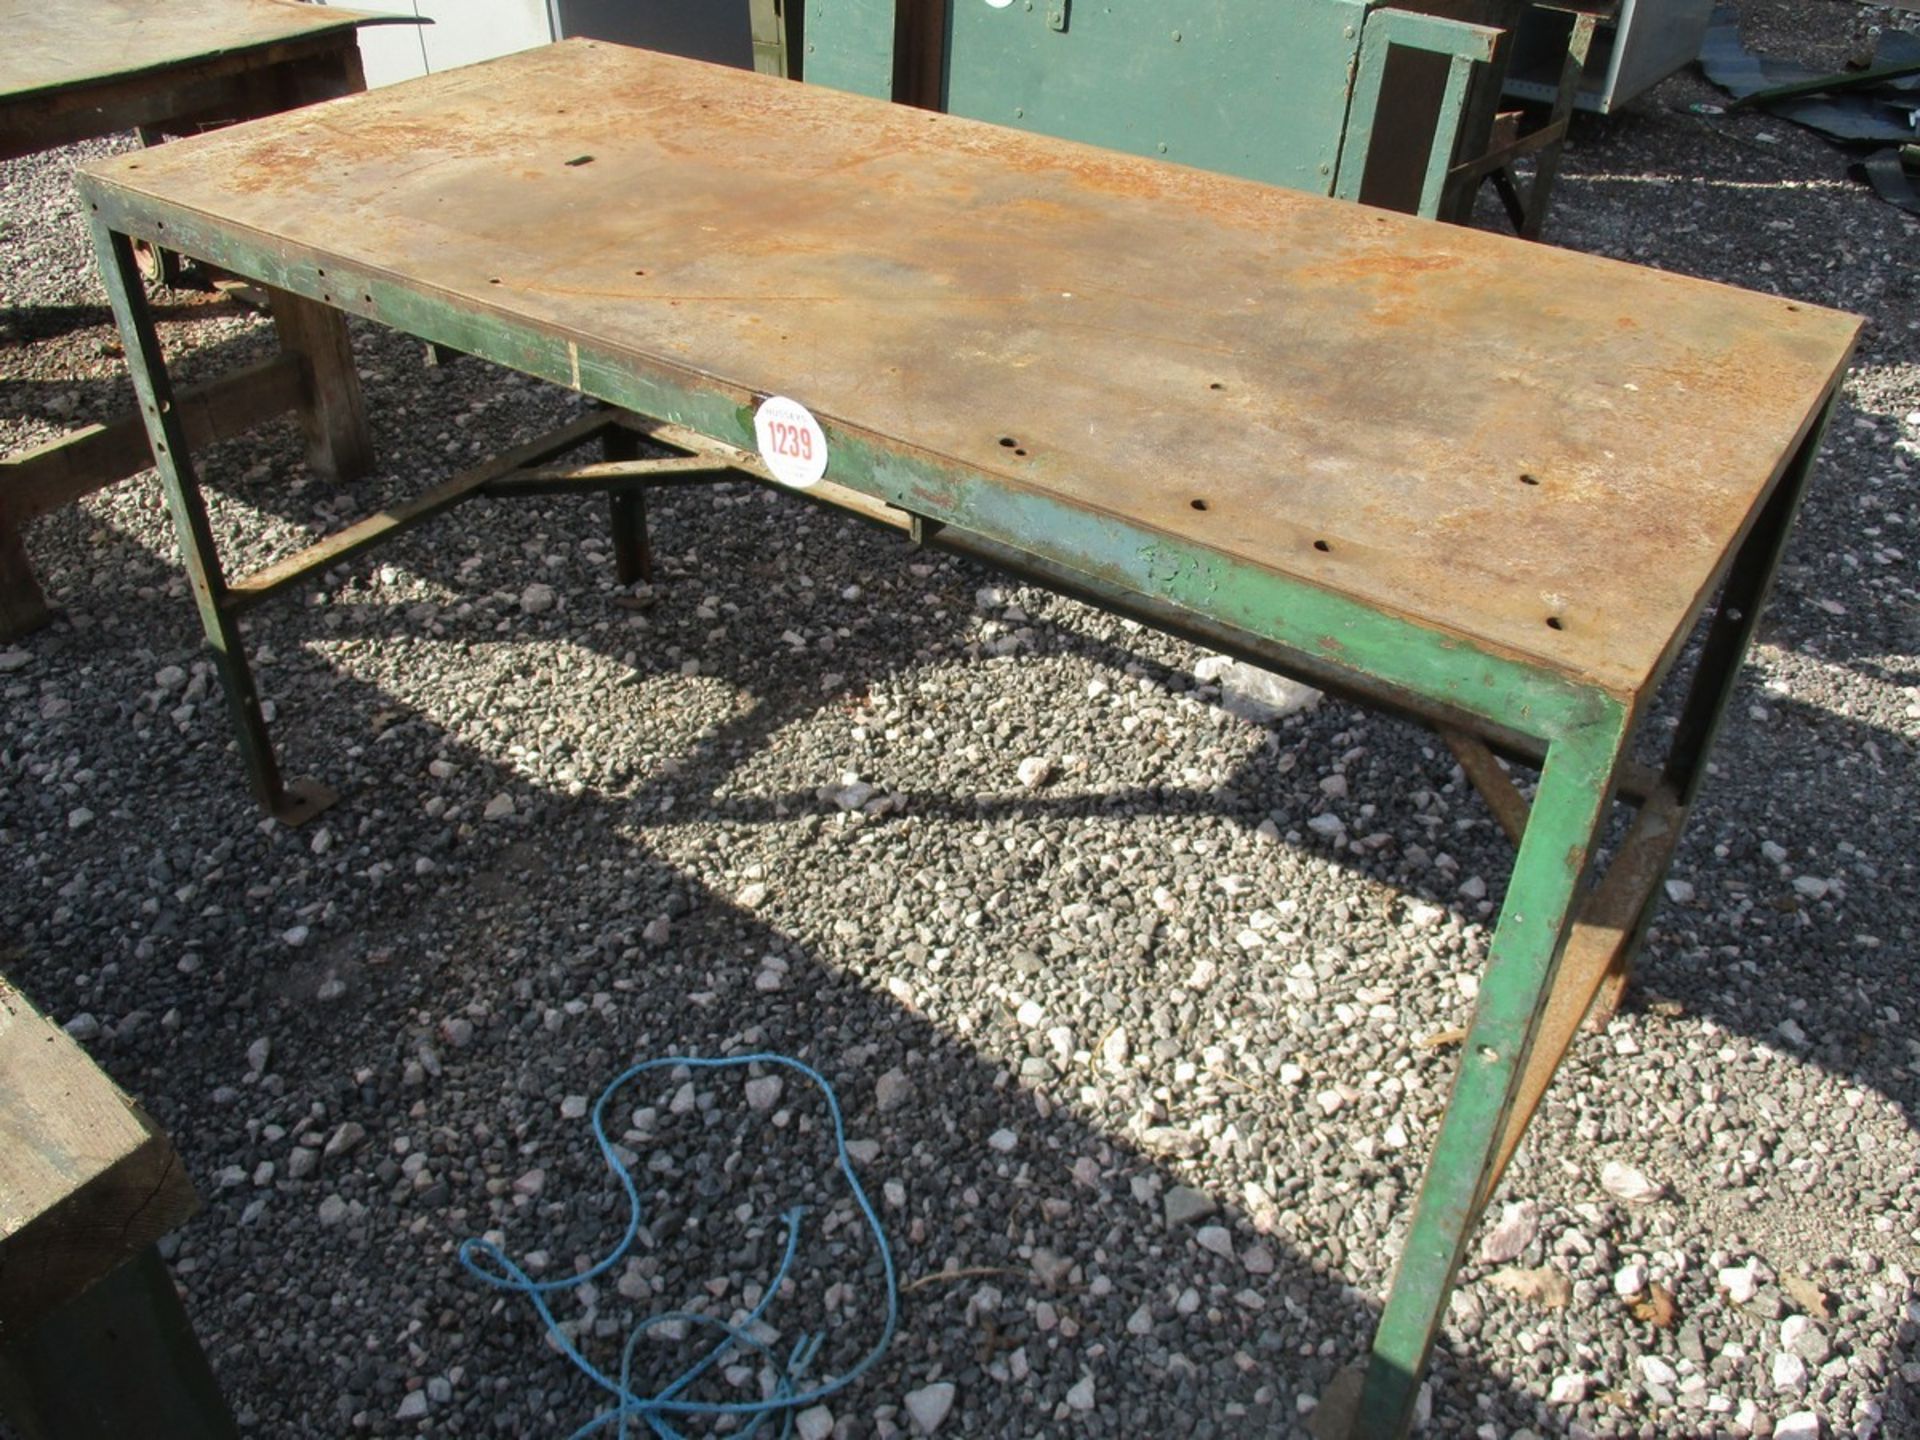 5FT X 2FT 3 INCHES STEEL WORKBENCH